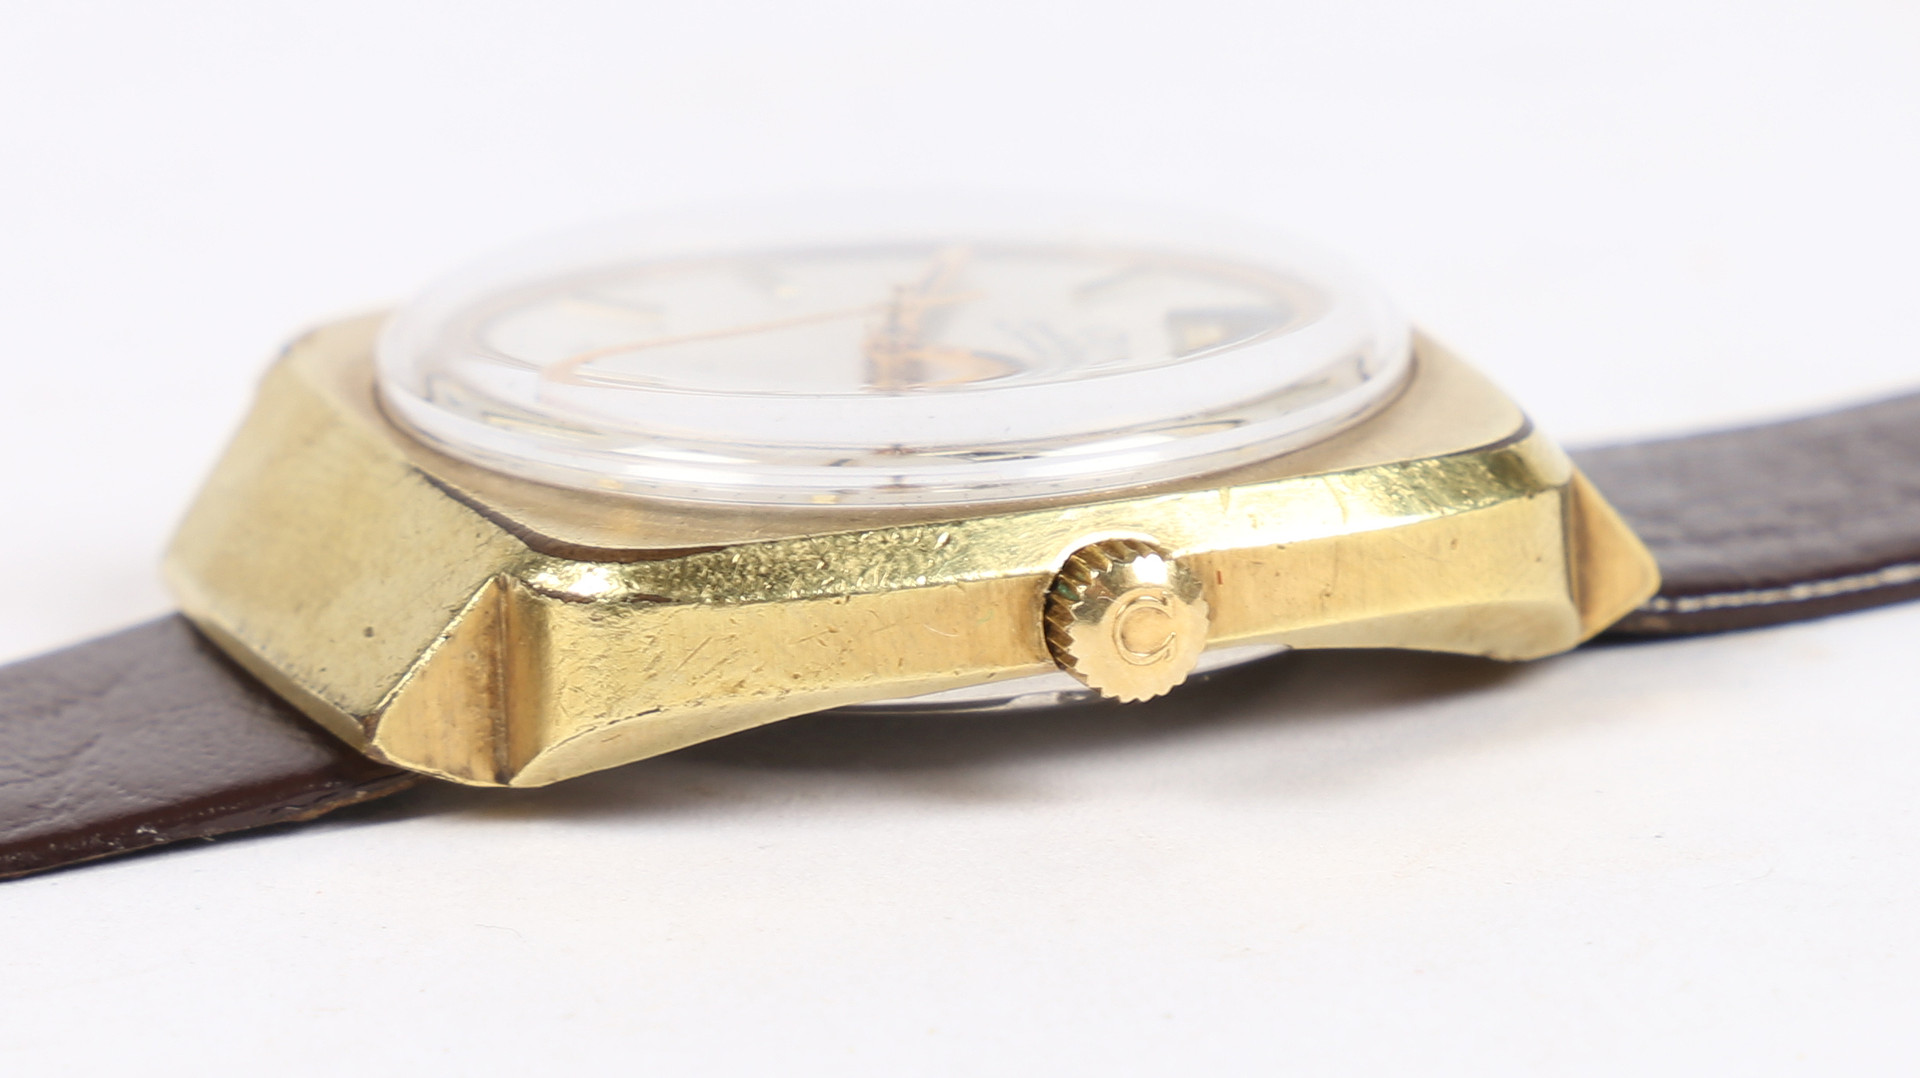 AN OMEGA GENEVE GOLD PLATED GENTLEMAN'S WRISTWATCH. - Image 2 of 7